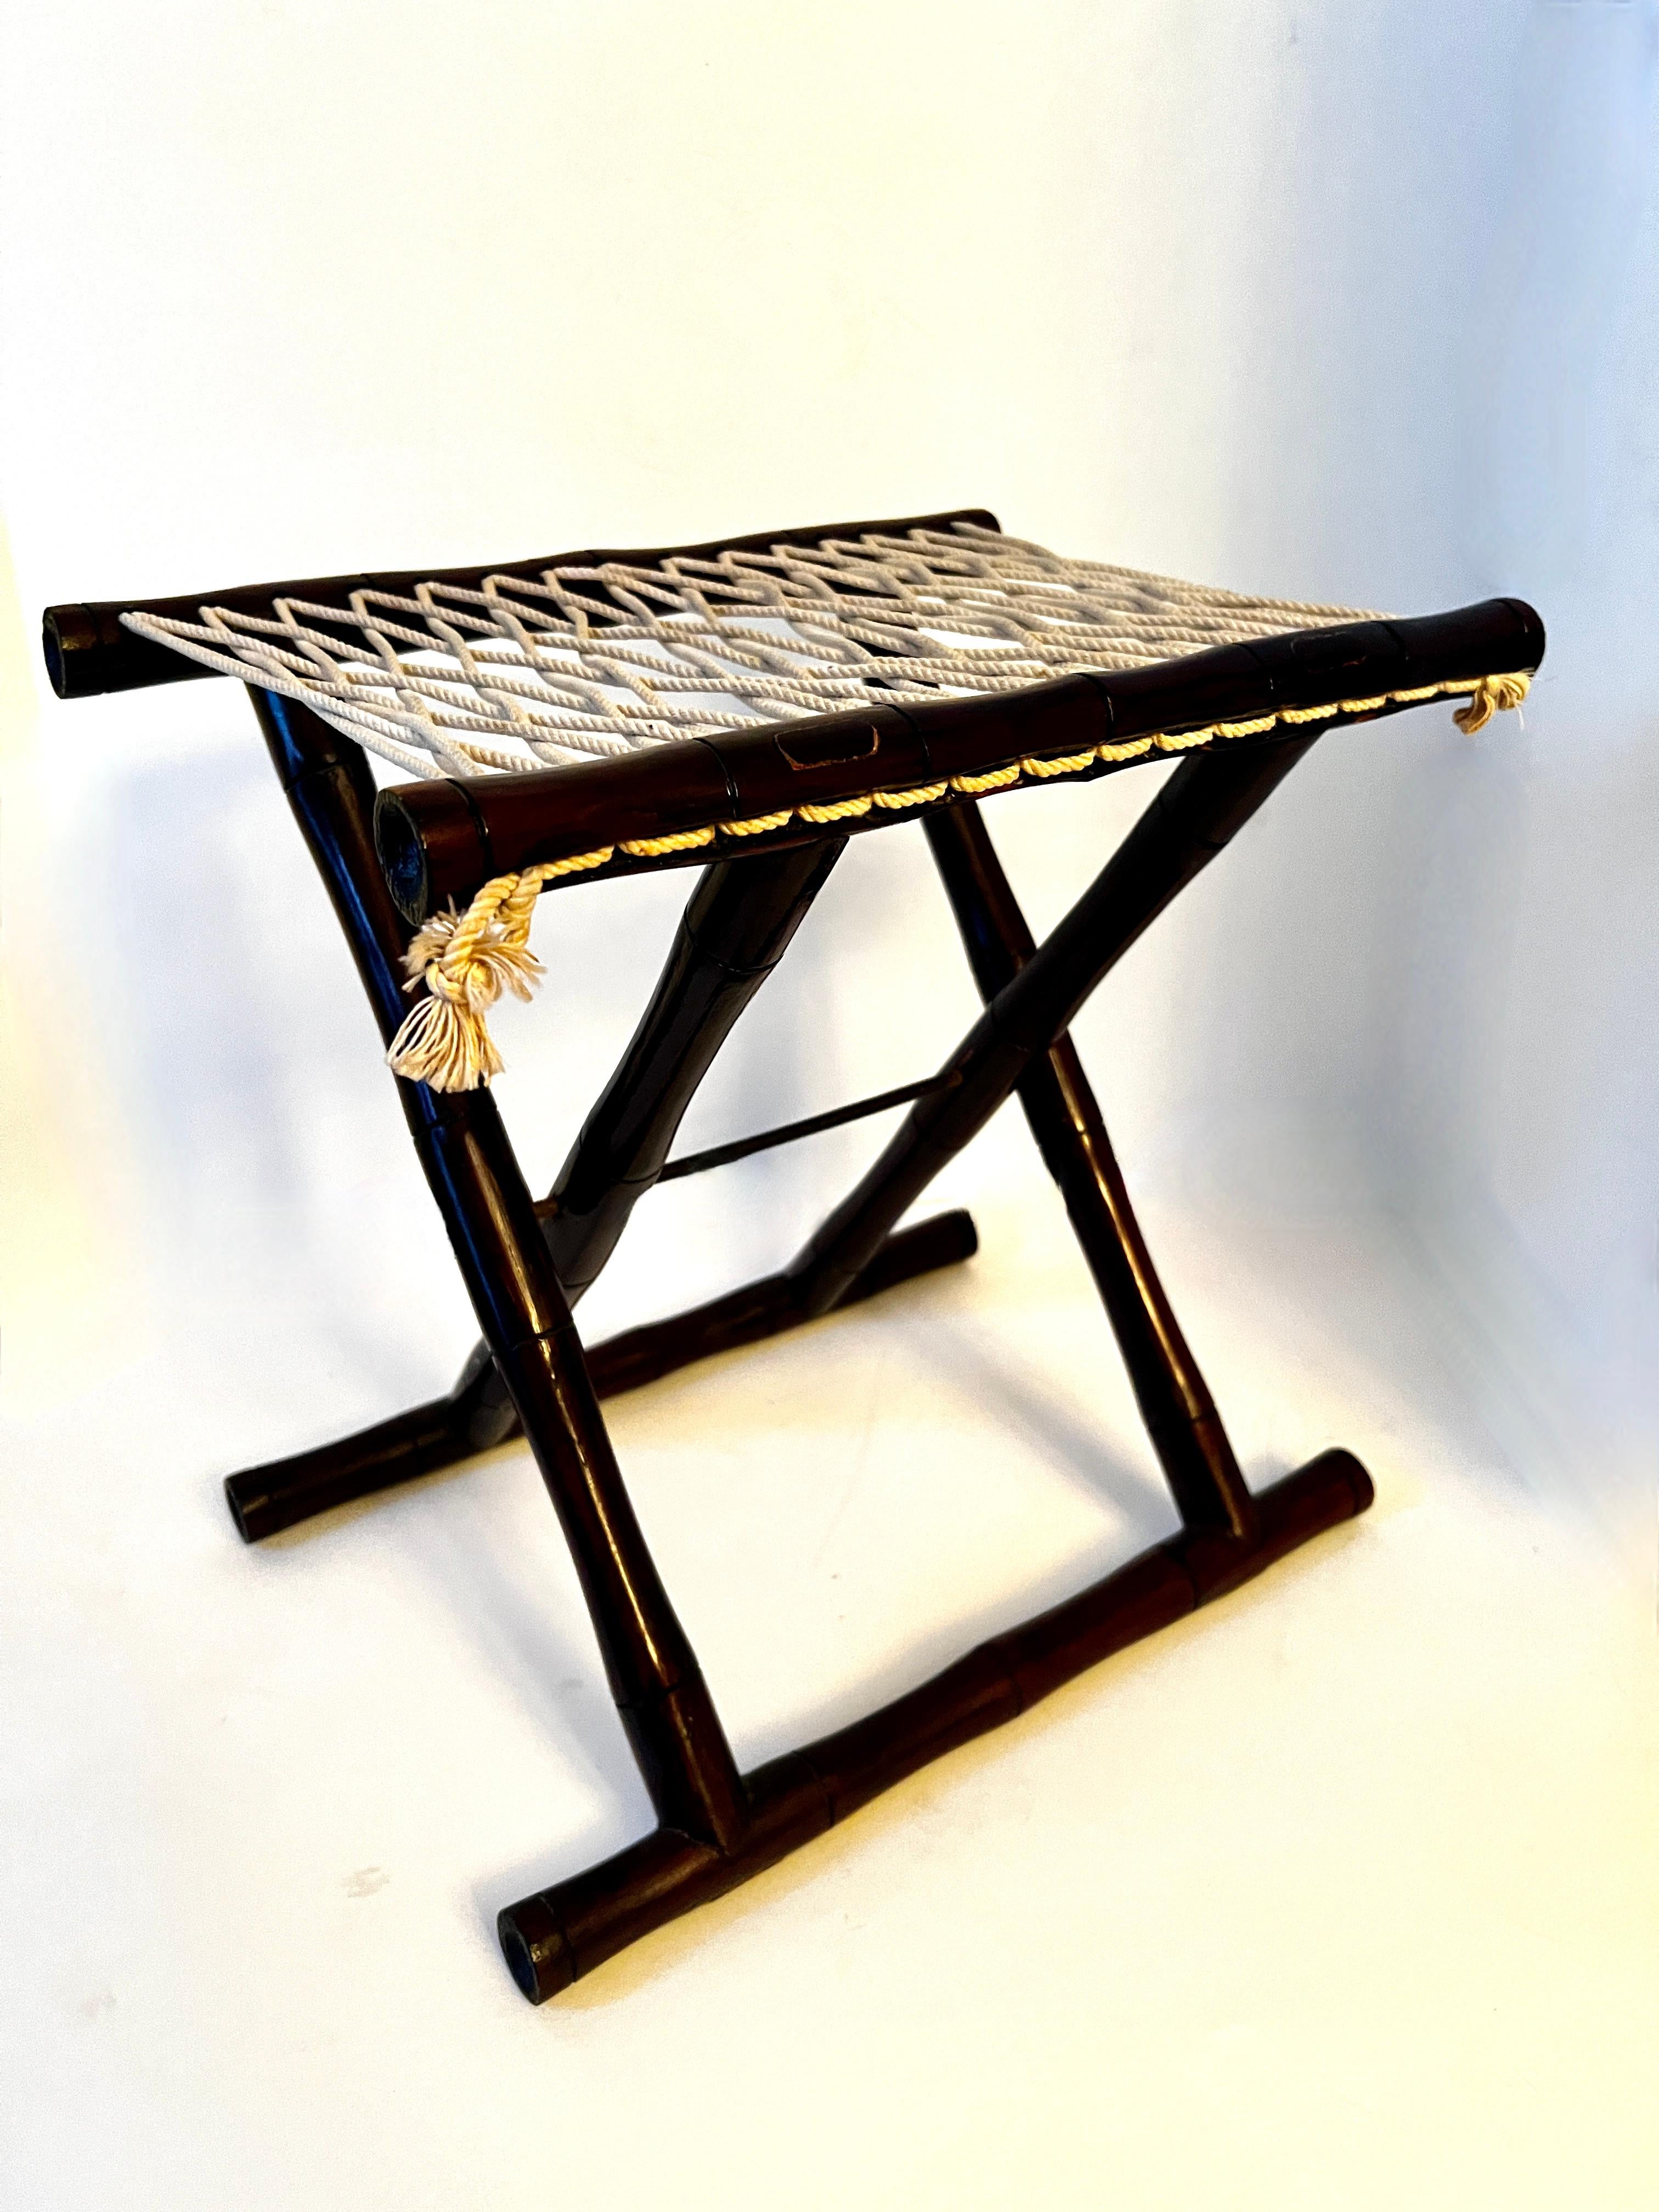 Folding Asian Fishermans Stool with Bamboo Frame and Woven Rope seat.  A wonderful decorative piece - this can also be practical, however, due to the size will likely work best under a console or other side table.  

We also like to use these with